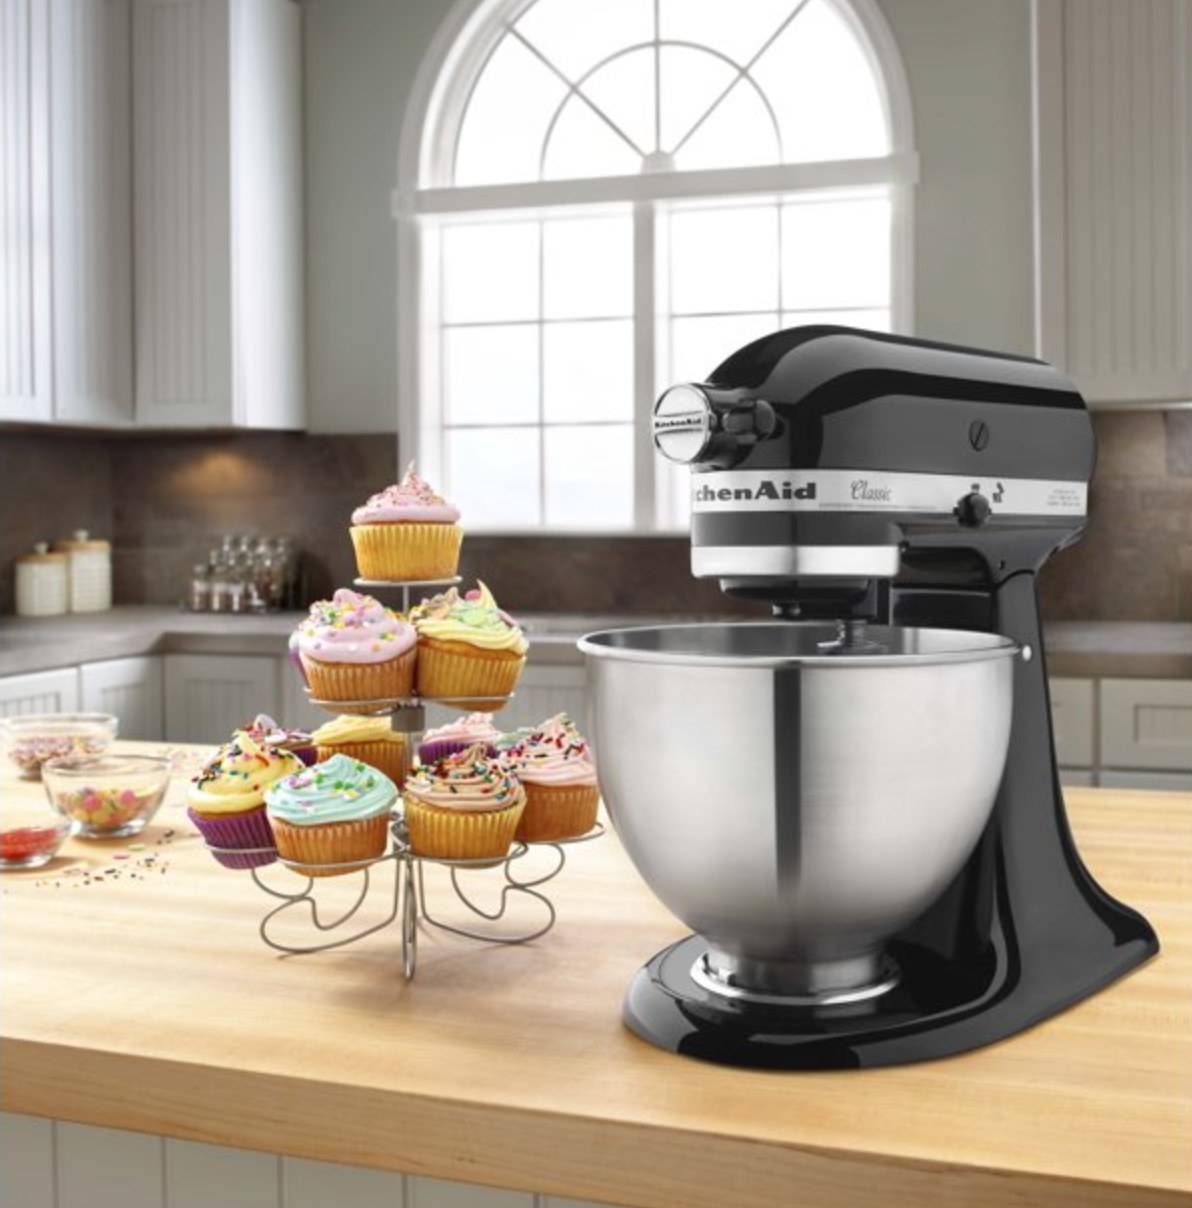 the black stand mixer on a kitchen counter next to a display of cupcakes